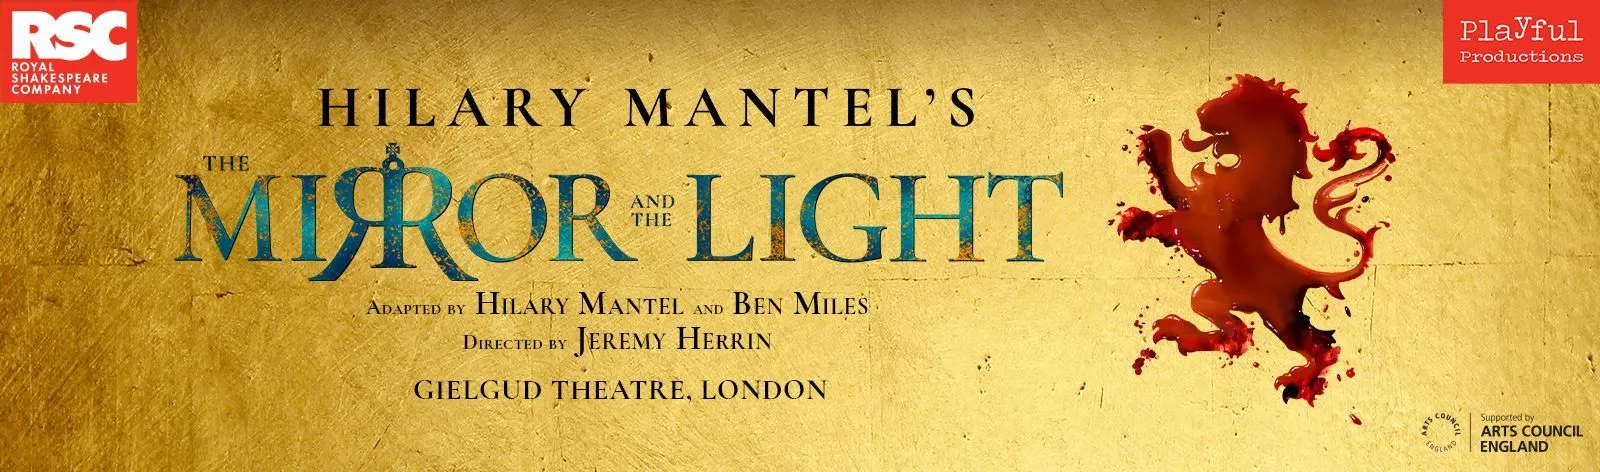 Ben Miles is playing Thomas Cromwell in the play based upon Hilary Mantel’s Sunday Times best-seller. Get The Mirror and the Light London tickets today. 